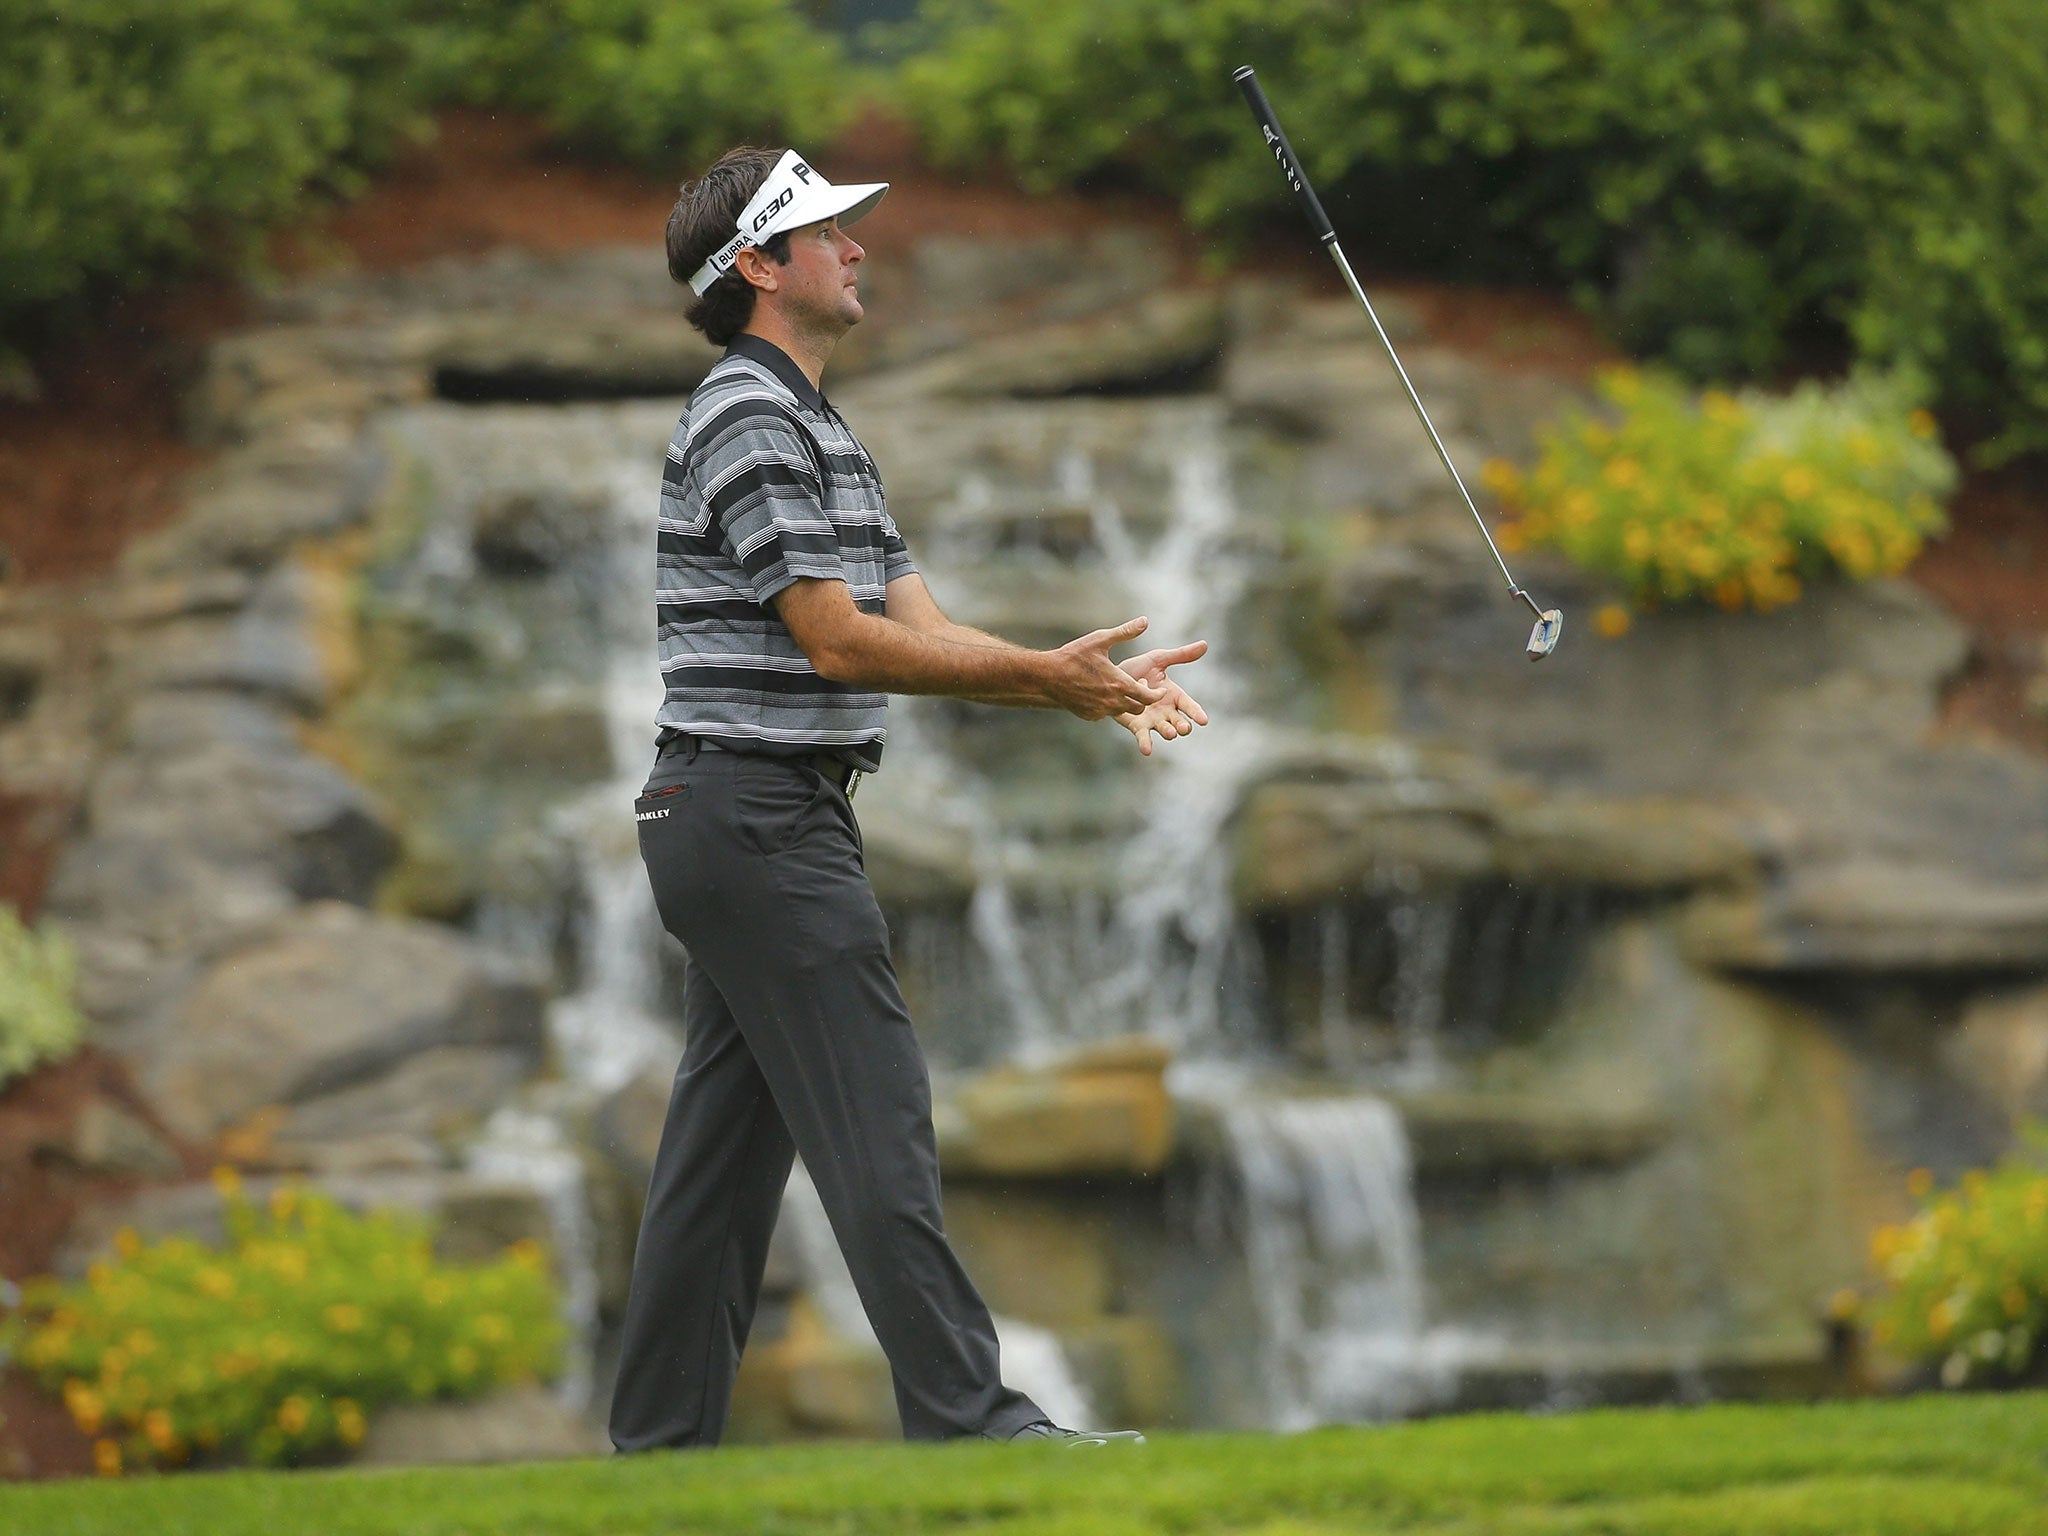 Bubba Watson has a trying round, often moaning about the conditions on his way to a 74